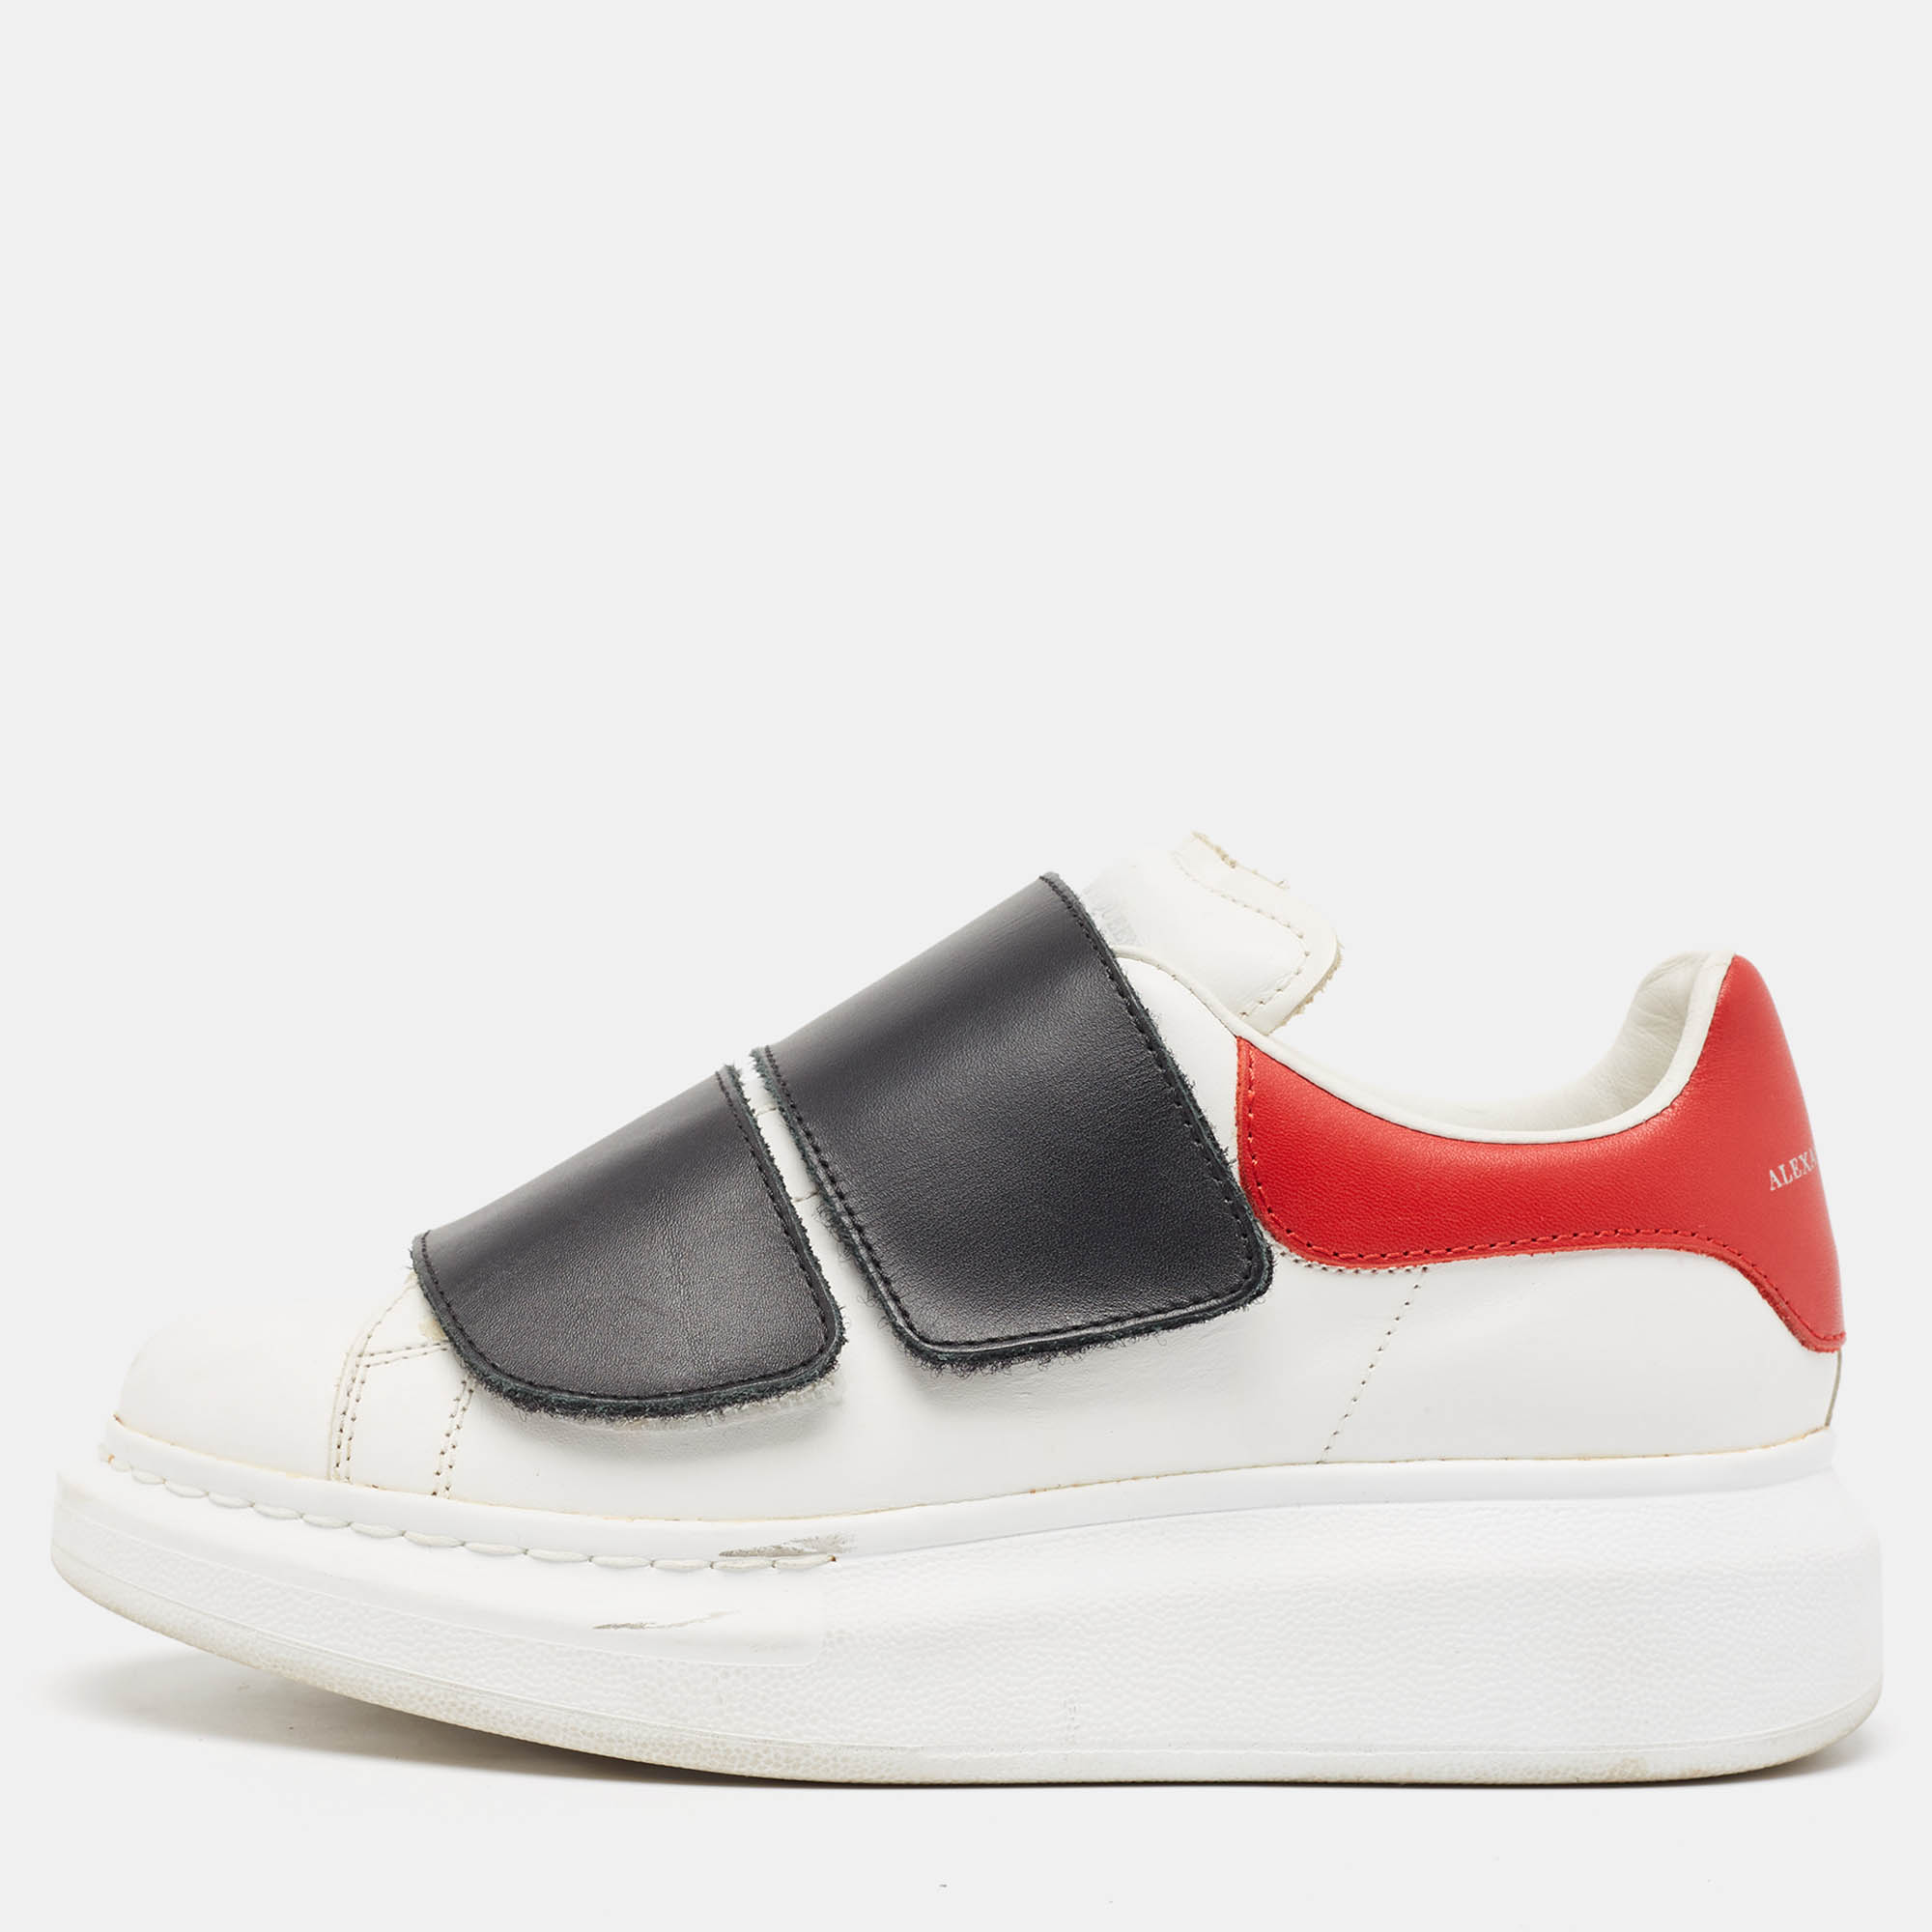 Alexander mcqueen tricolor leather oversized velcro strap sneakers size 35